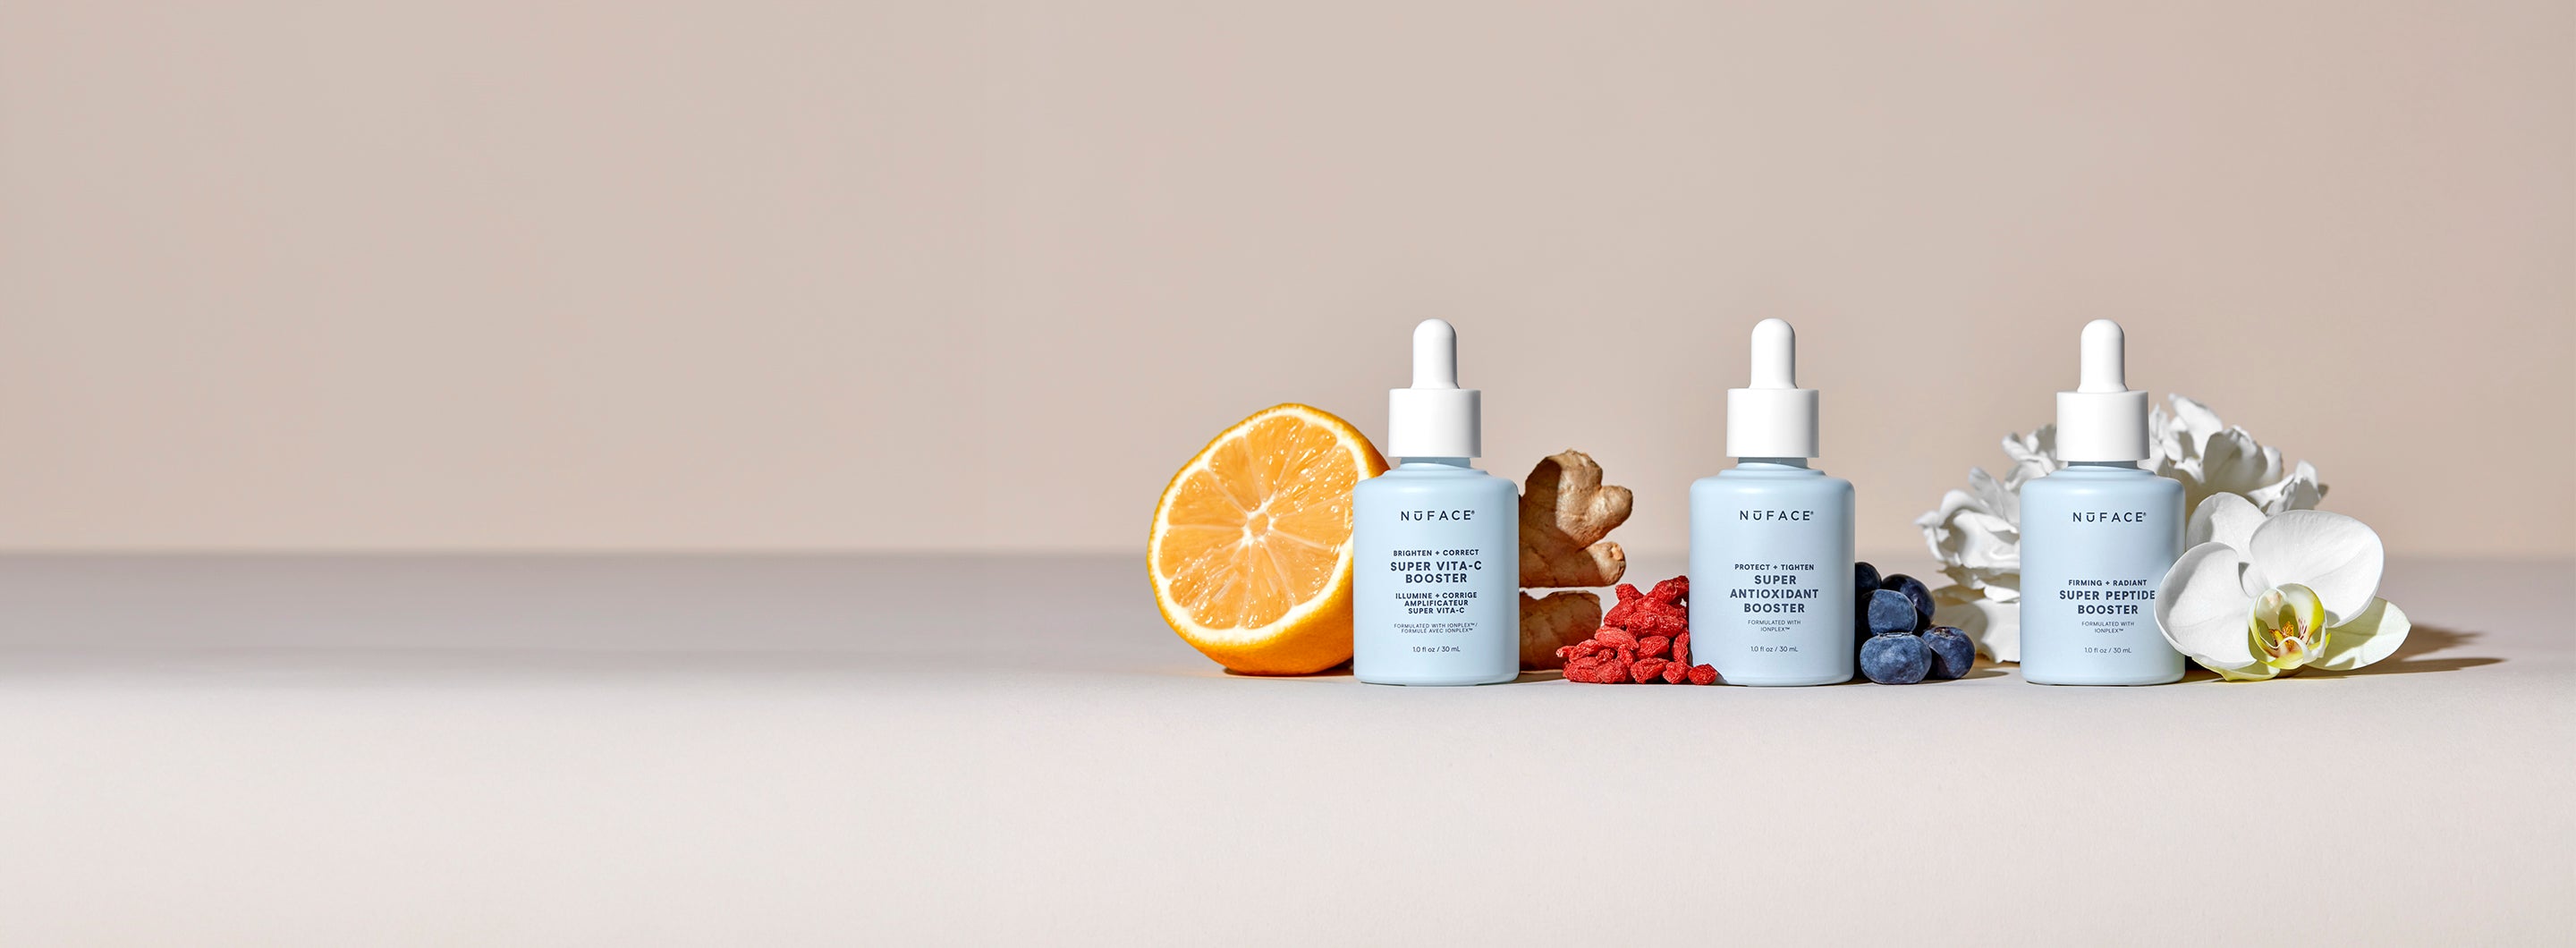 super booster serums with their key ingredients